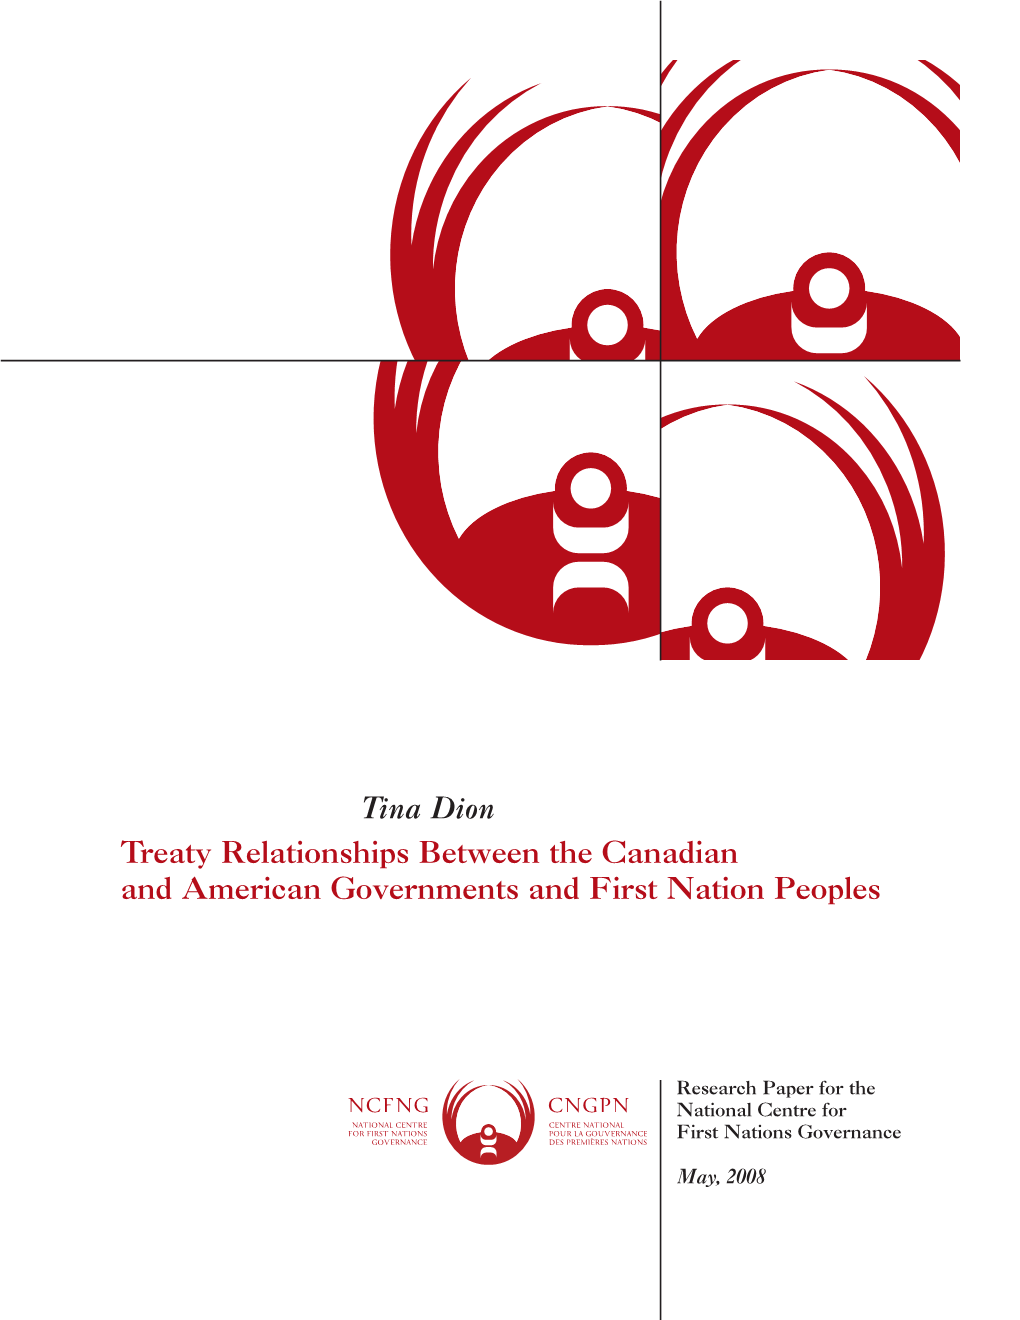 Treaty Relationships Between the Canadian and American Governments and First Nation Peoples